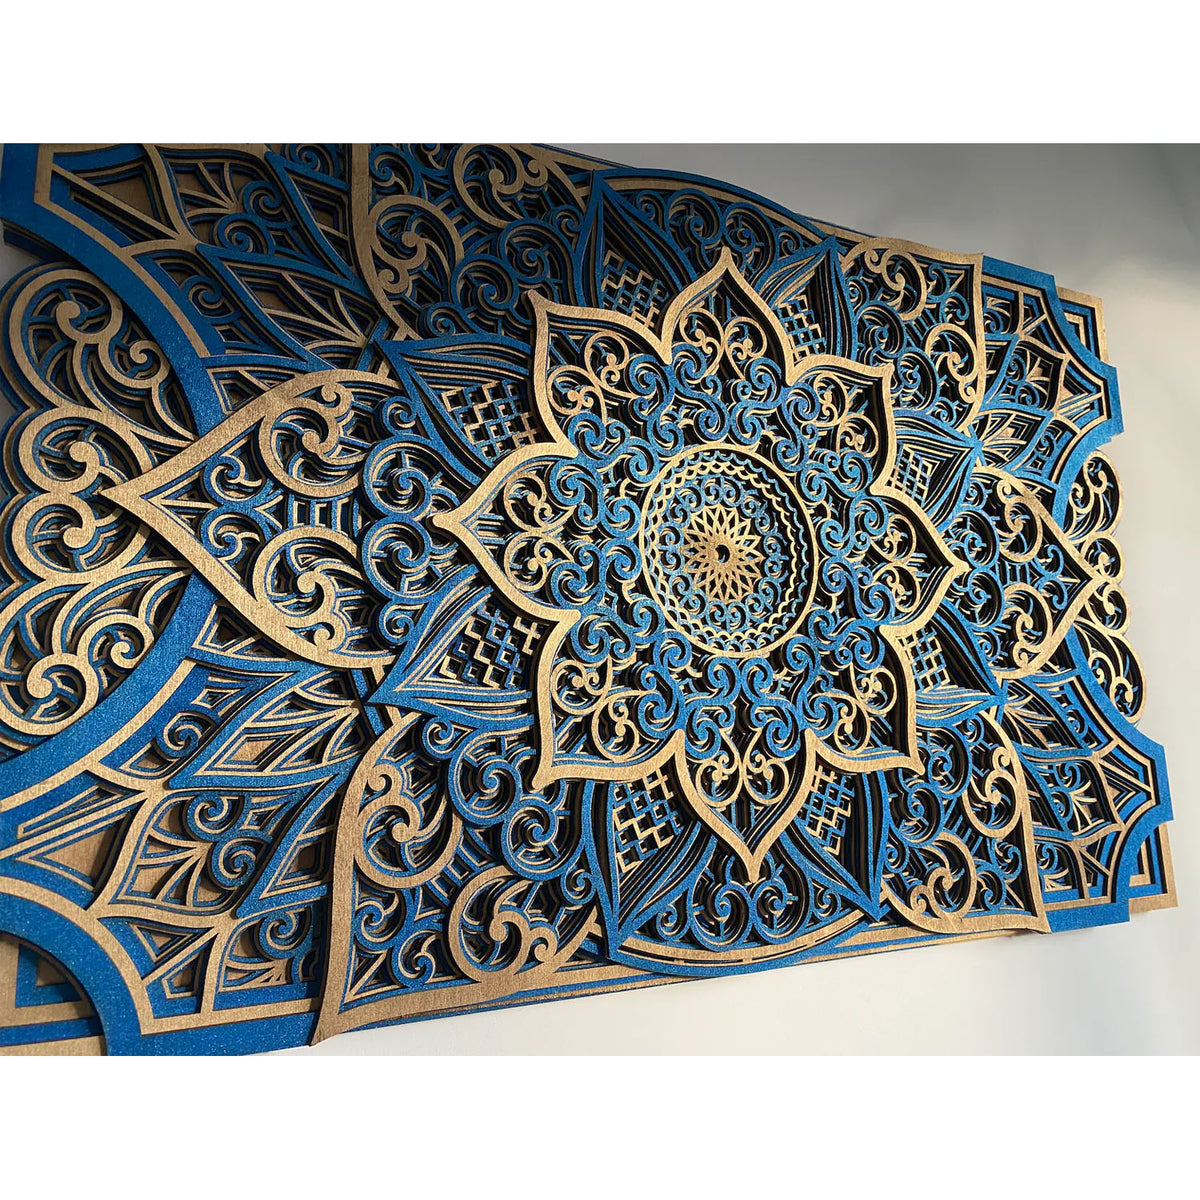 Osax Handcrafted Wooden Wall Decor - Blue/Gold - Notbrand